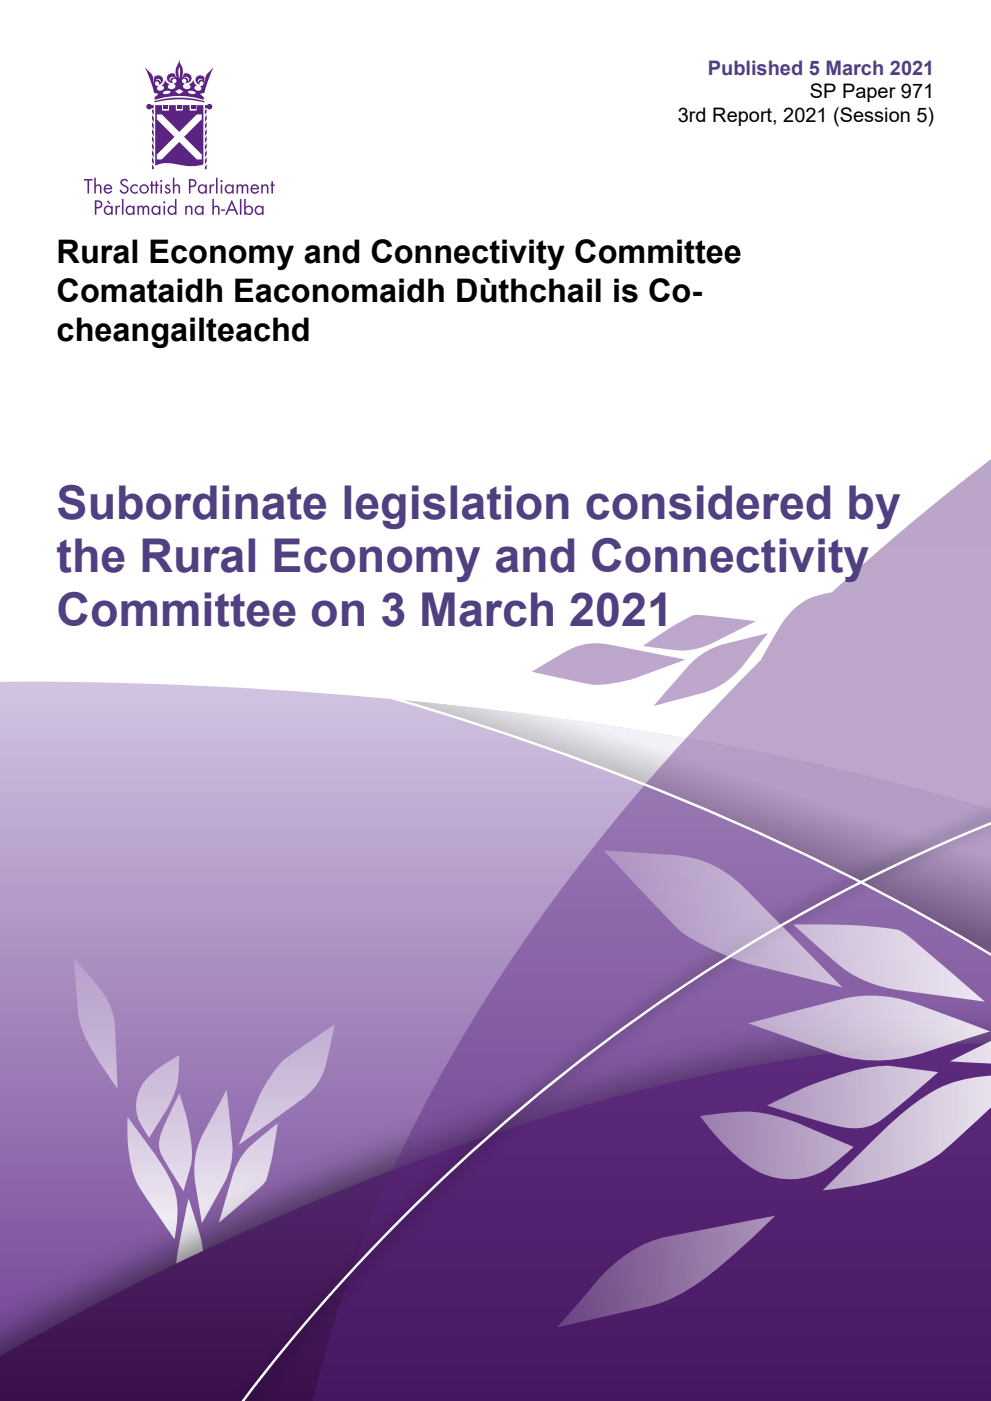 Rural Economy and Connectivity Committee 3rd Report, 2021: Subordinate legislation considered by the Rural Economy and Connectivity Committee on 3 March 2021